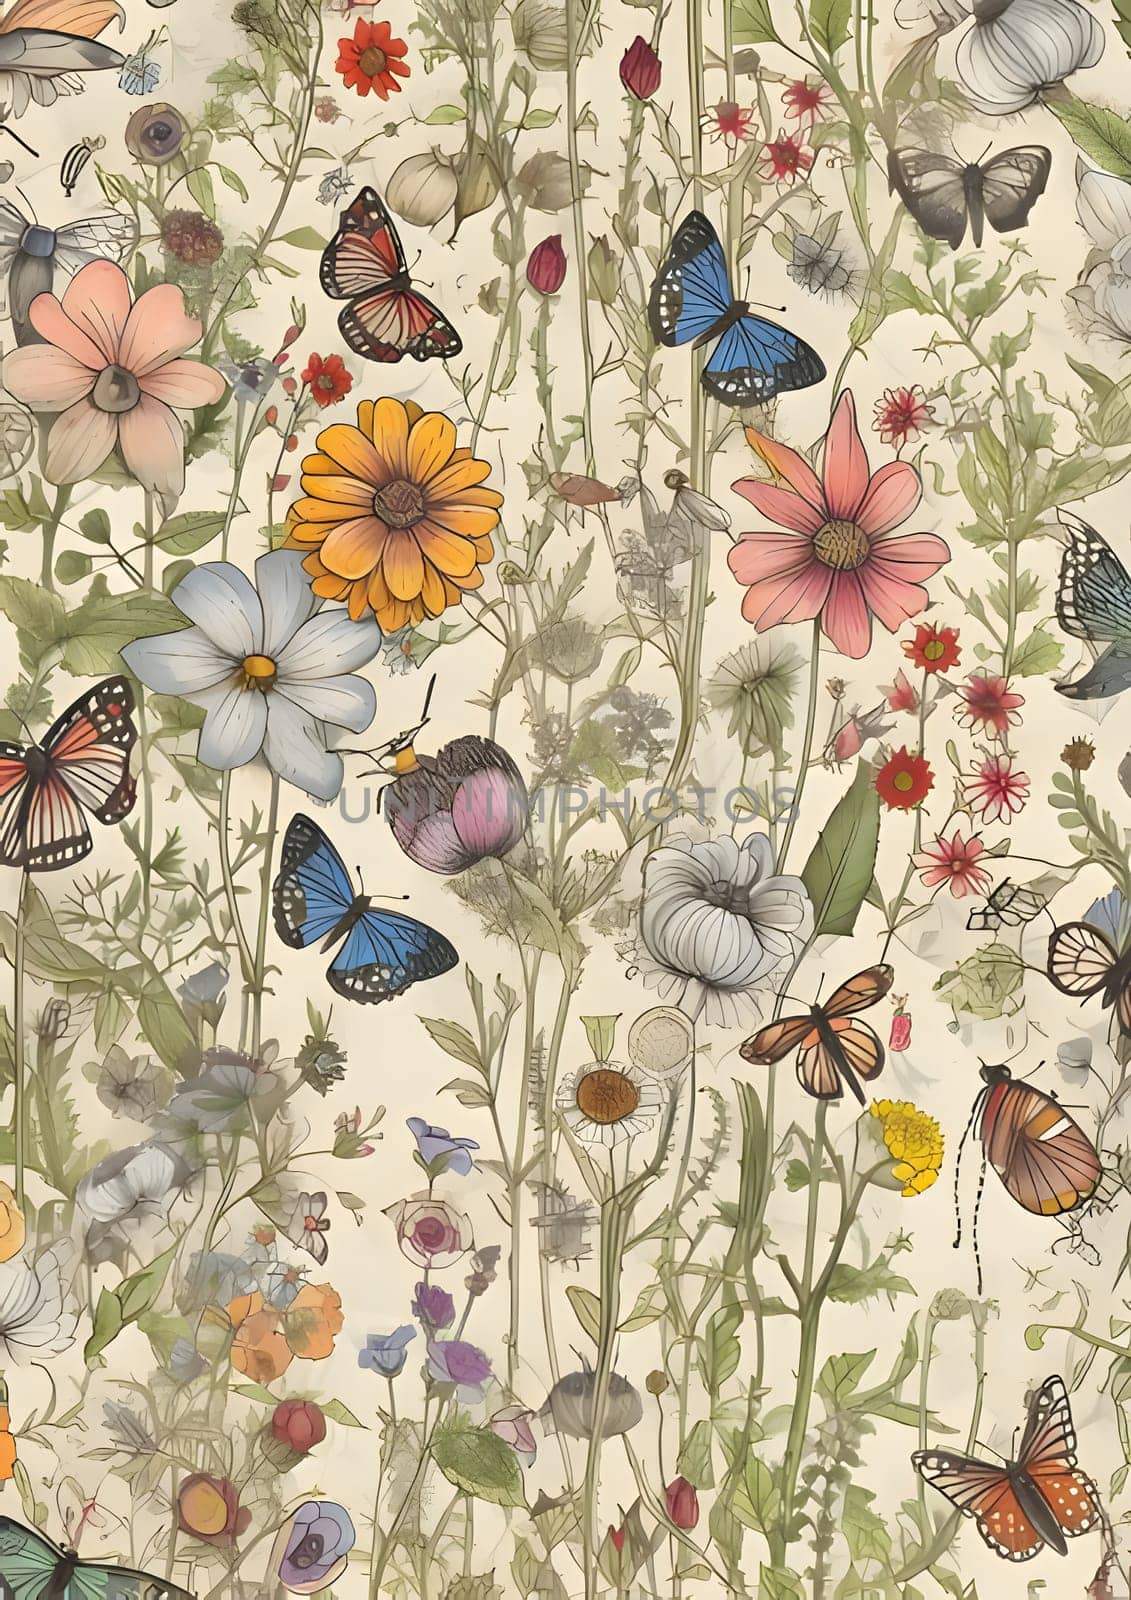 Patterns and banners backgrounds: Seamless pattern with wild flowers and butterflies. Hand-drawn illustration.